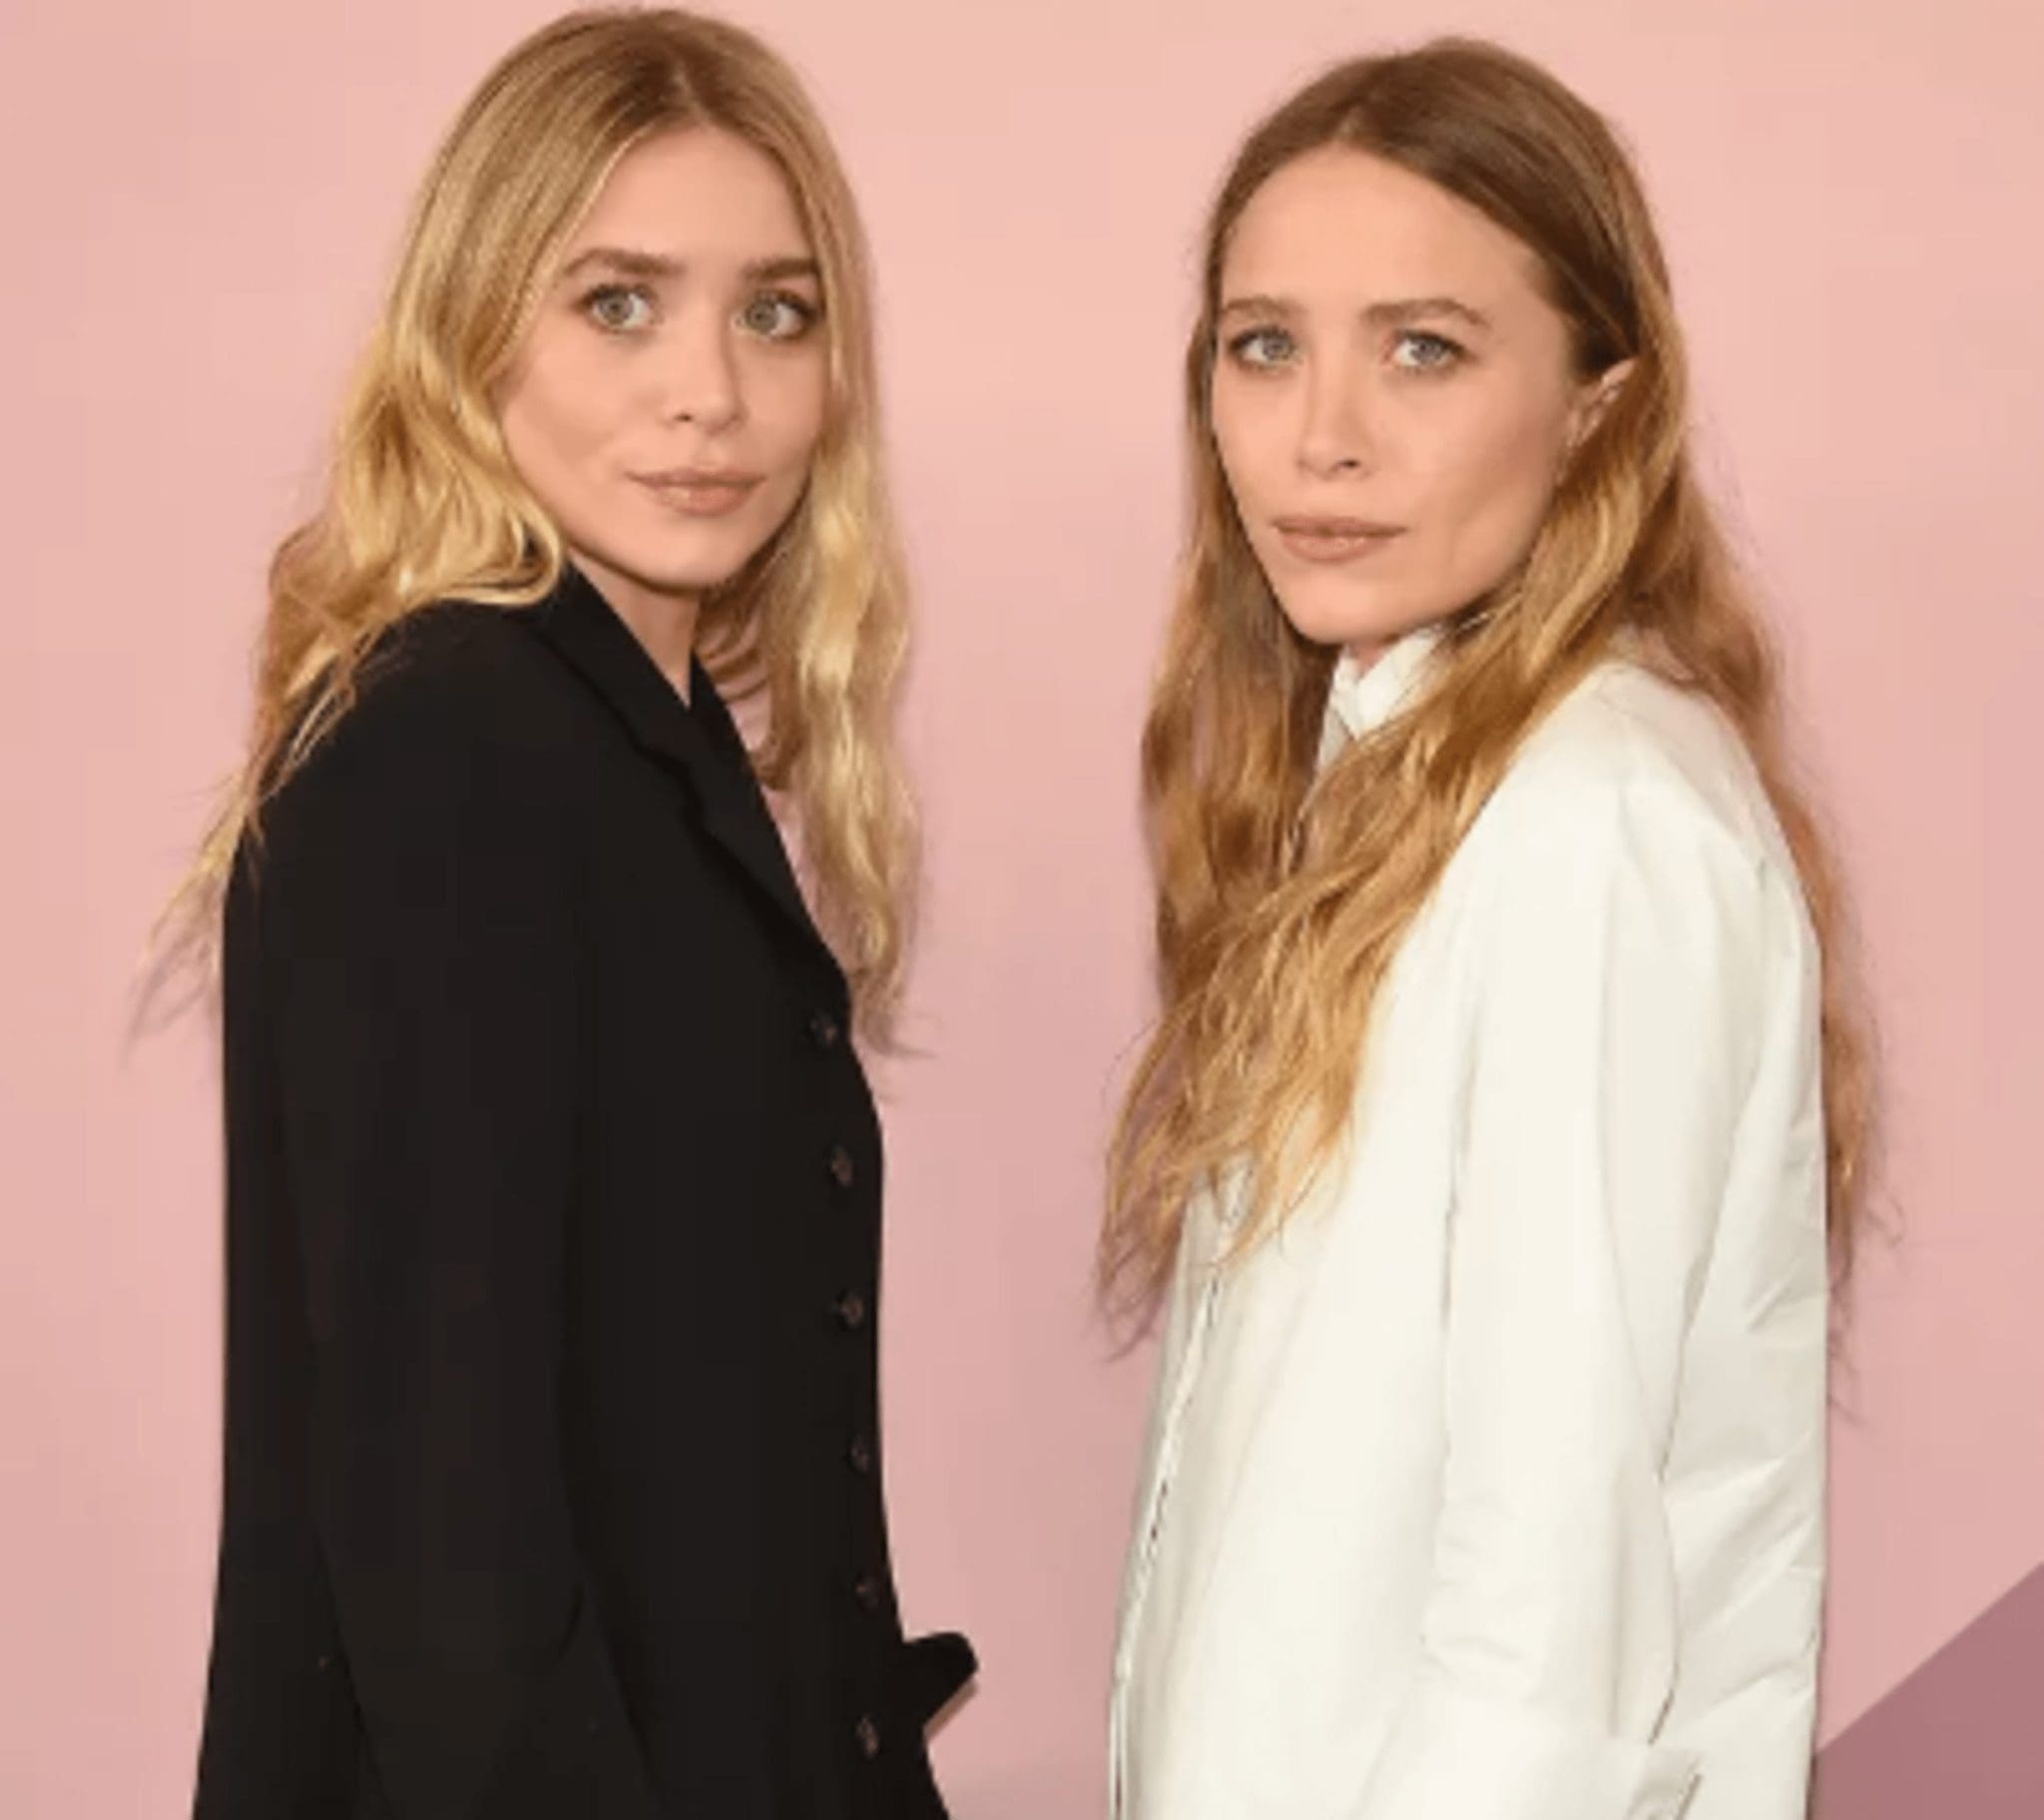 The Olsen Twins, Mary-Kate and Ashley, Have a Great Time at The Row's Paris Fashion Week